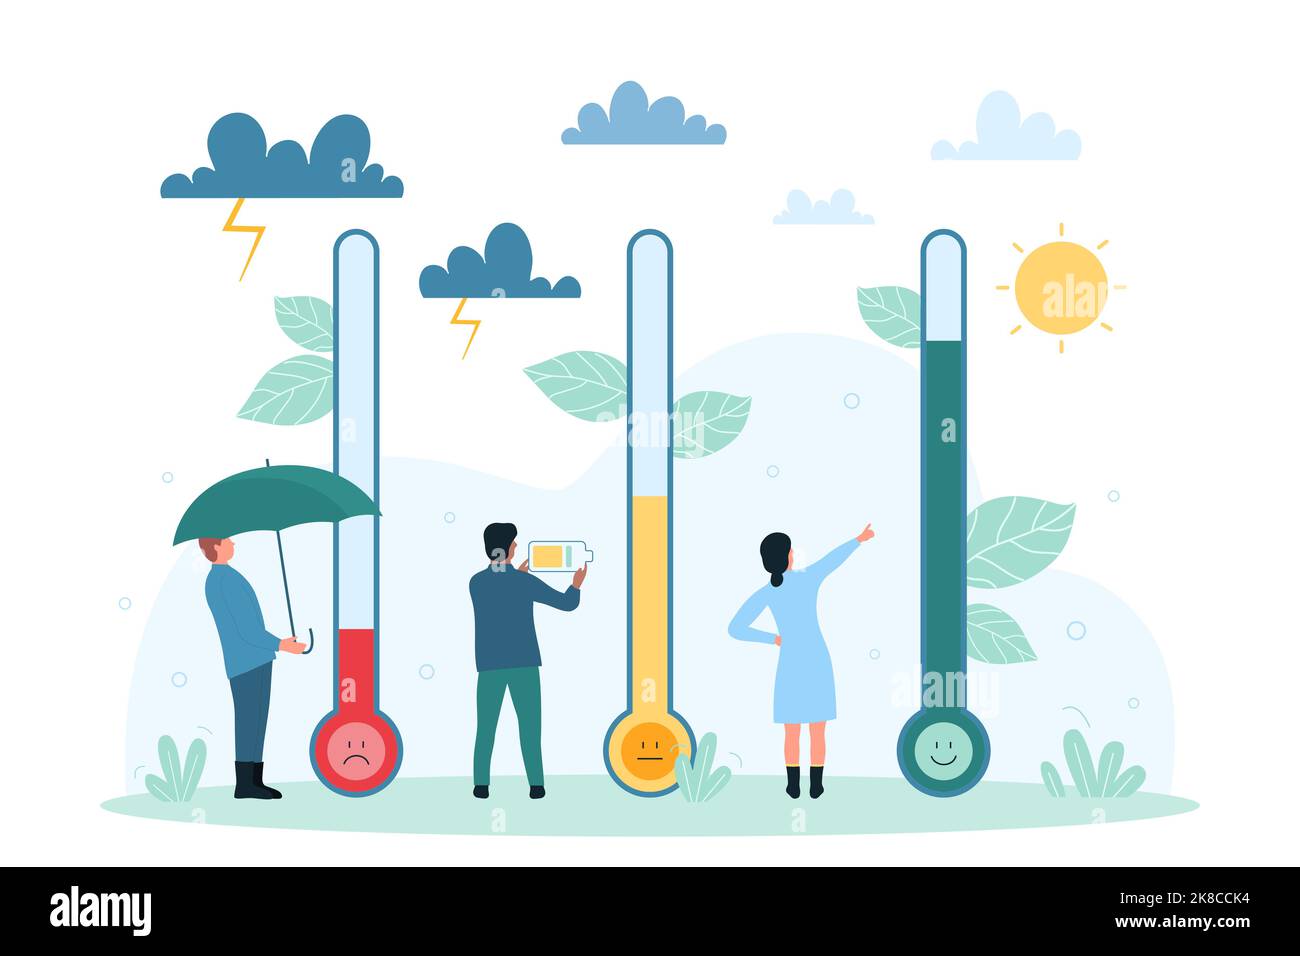 Assessment of stress levels with thermometer vector illustration. Cartoon tiny people rating mood on red, yellow and green color, umbrella and battery to control feelings, gauge burnout and anxiety Stock Vector